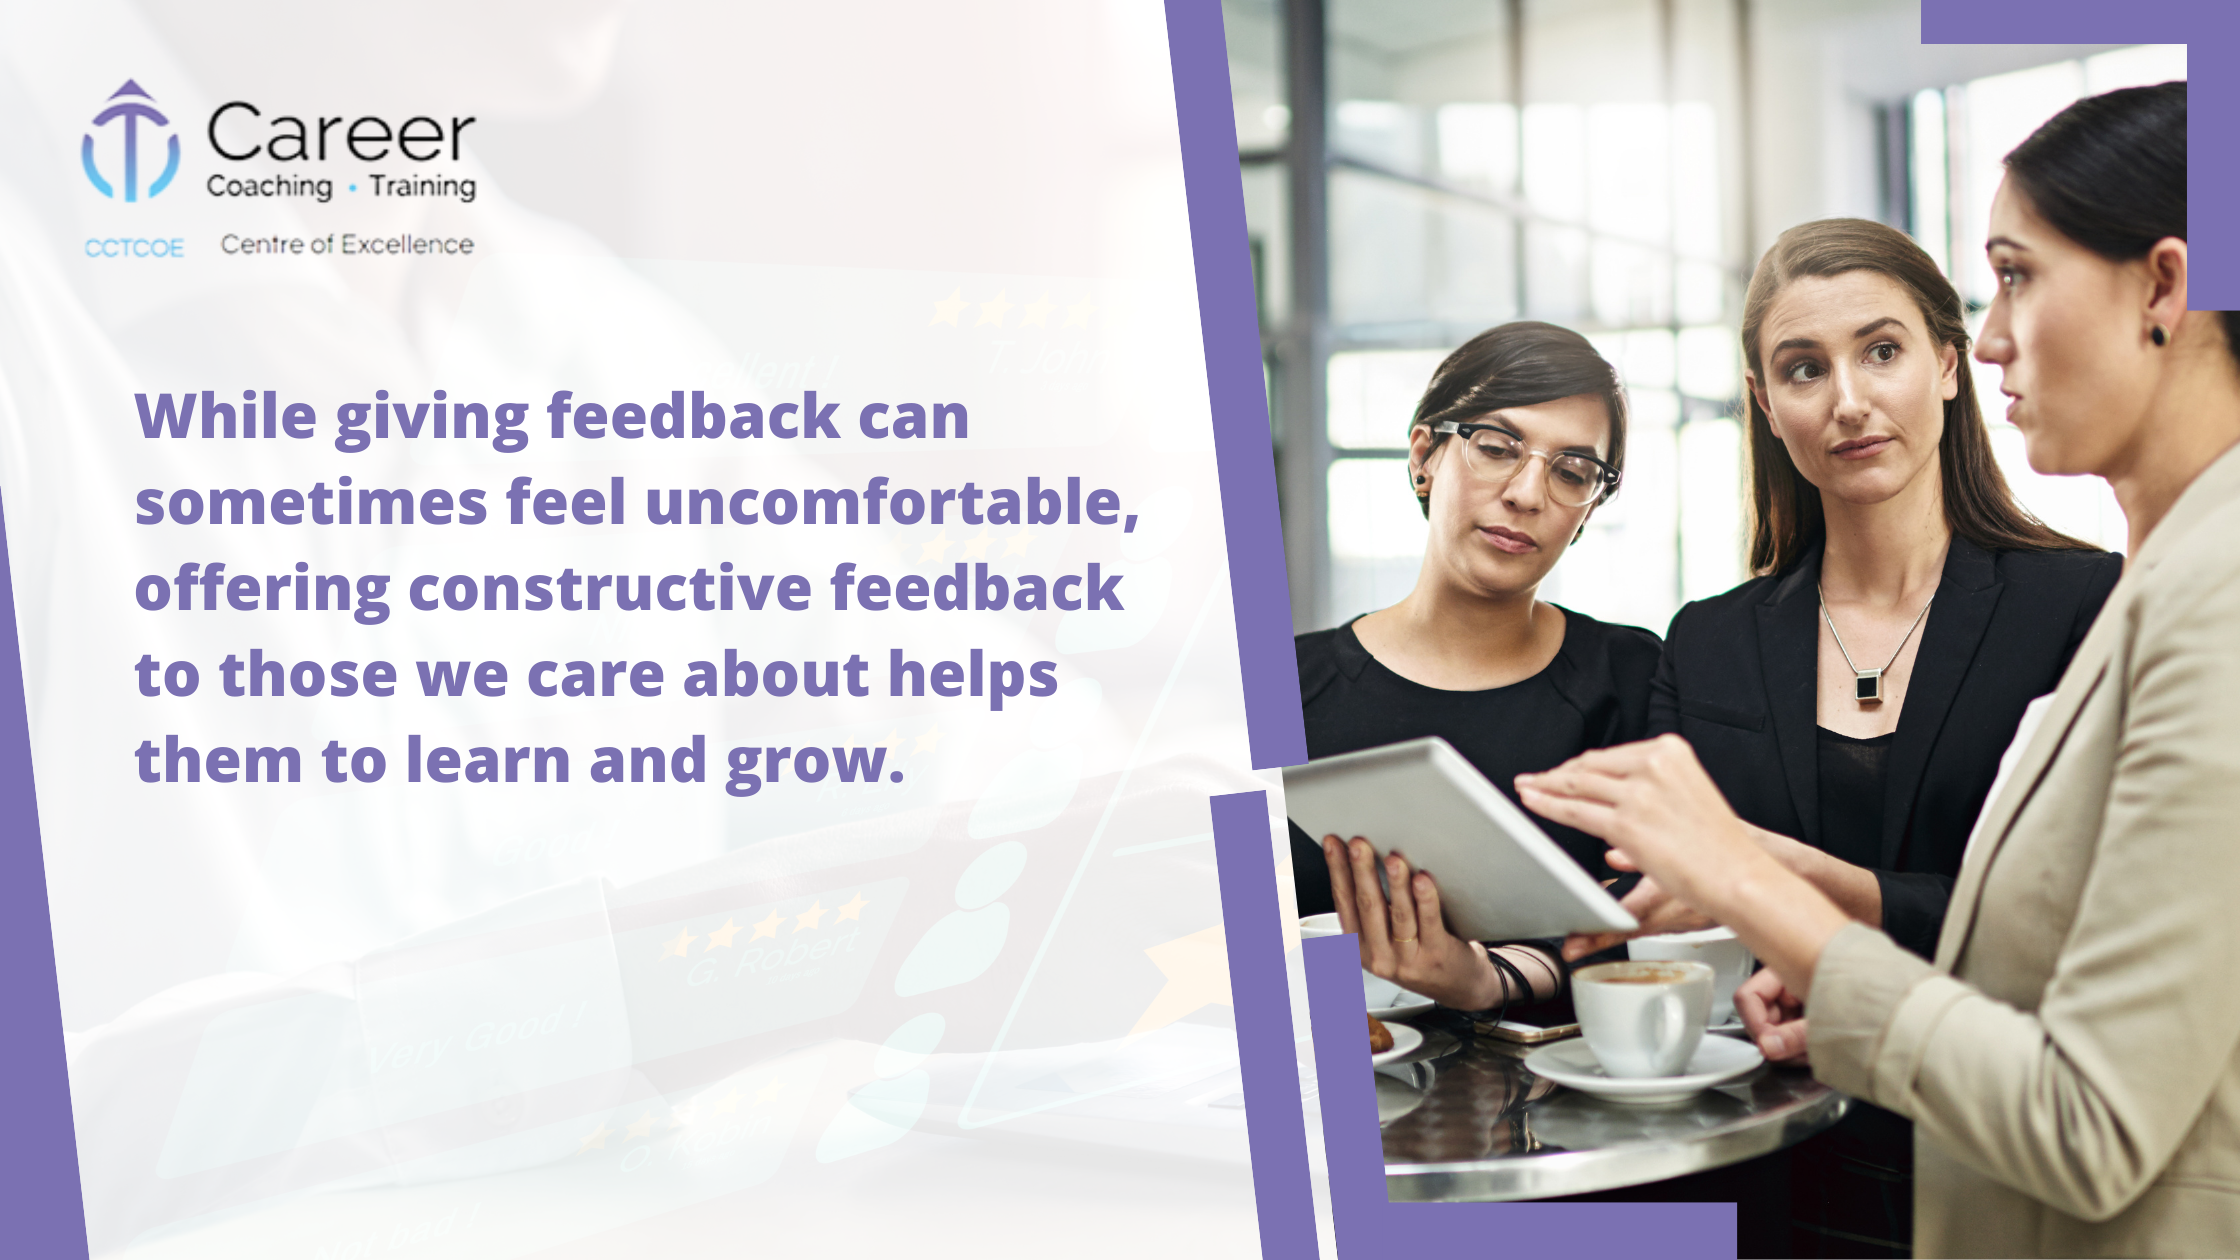 While_giving_feedback_can_sometimes_feel_uncomfortable,_offering_constructive_feedback_to_those_we_care_about_helps_them_to_learn_and_grow